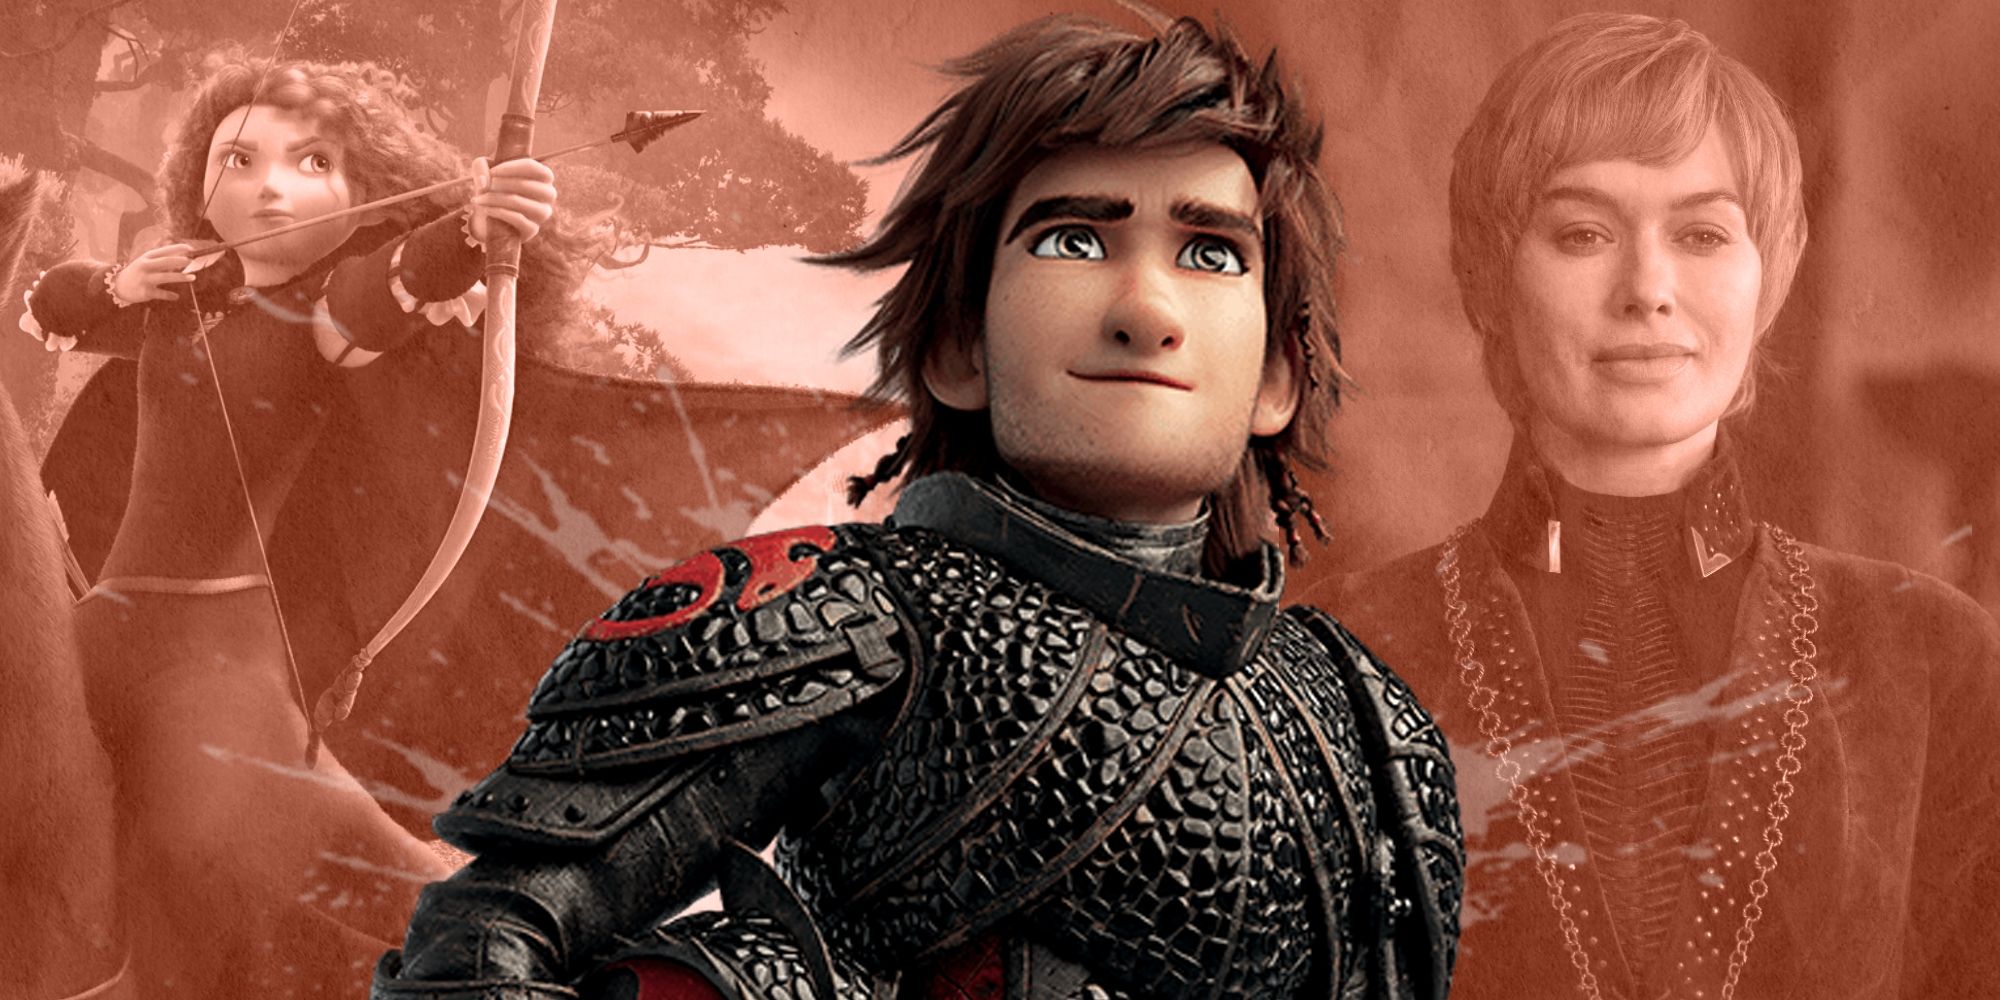 'How to Train Your Dragon's Hiccup pictured with 'Brave's Merida and Cersei Lannister from 'Game of Thrones' 